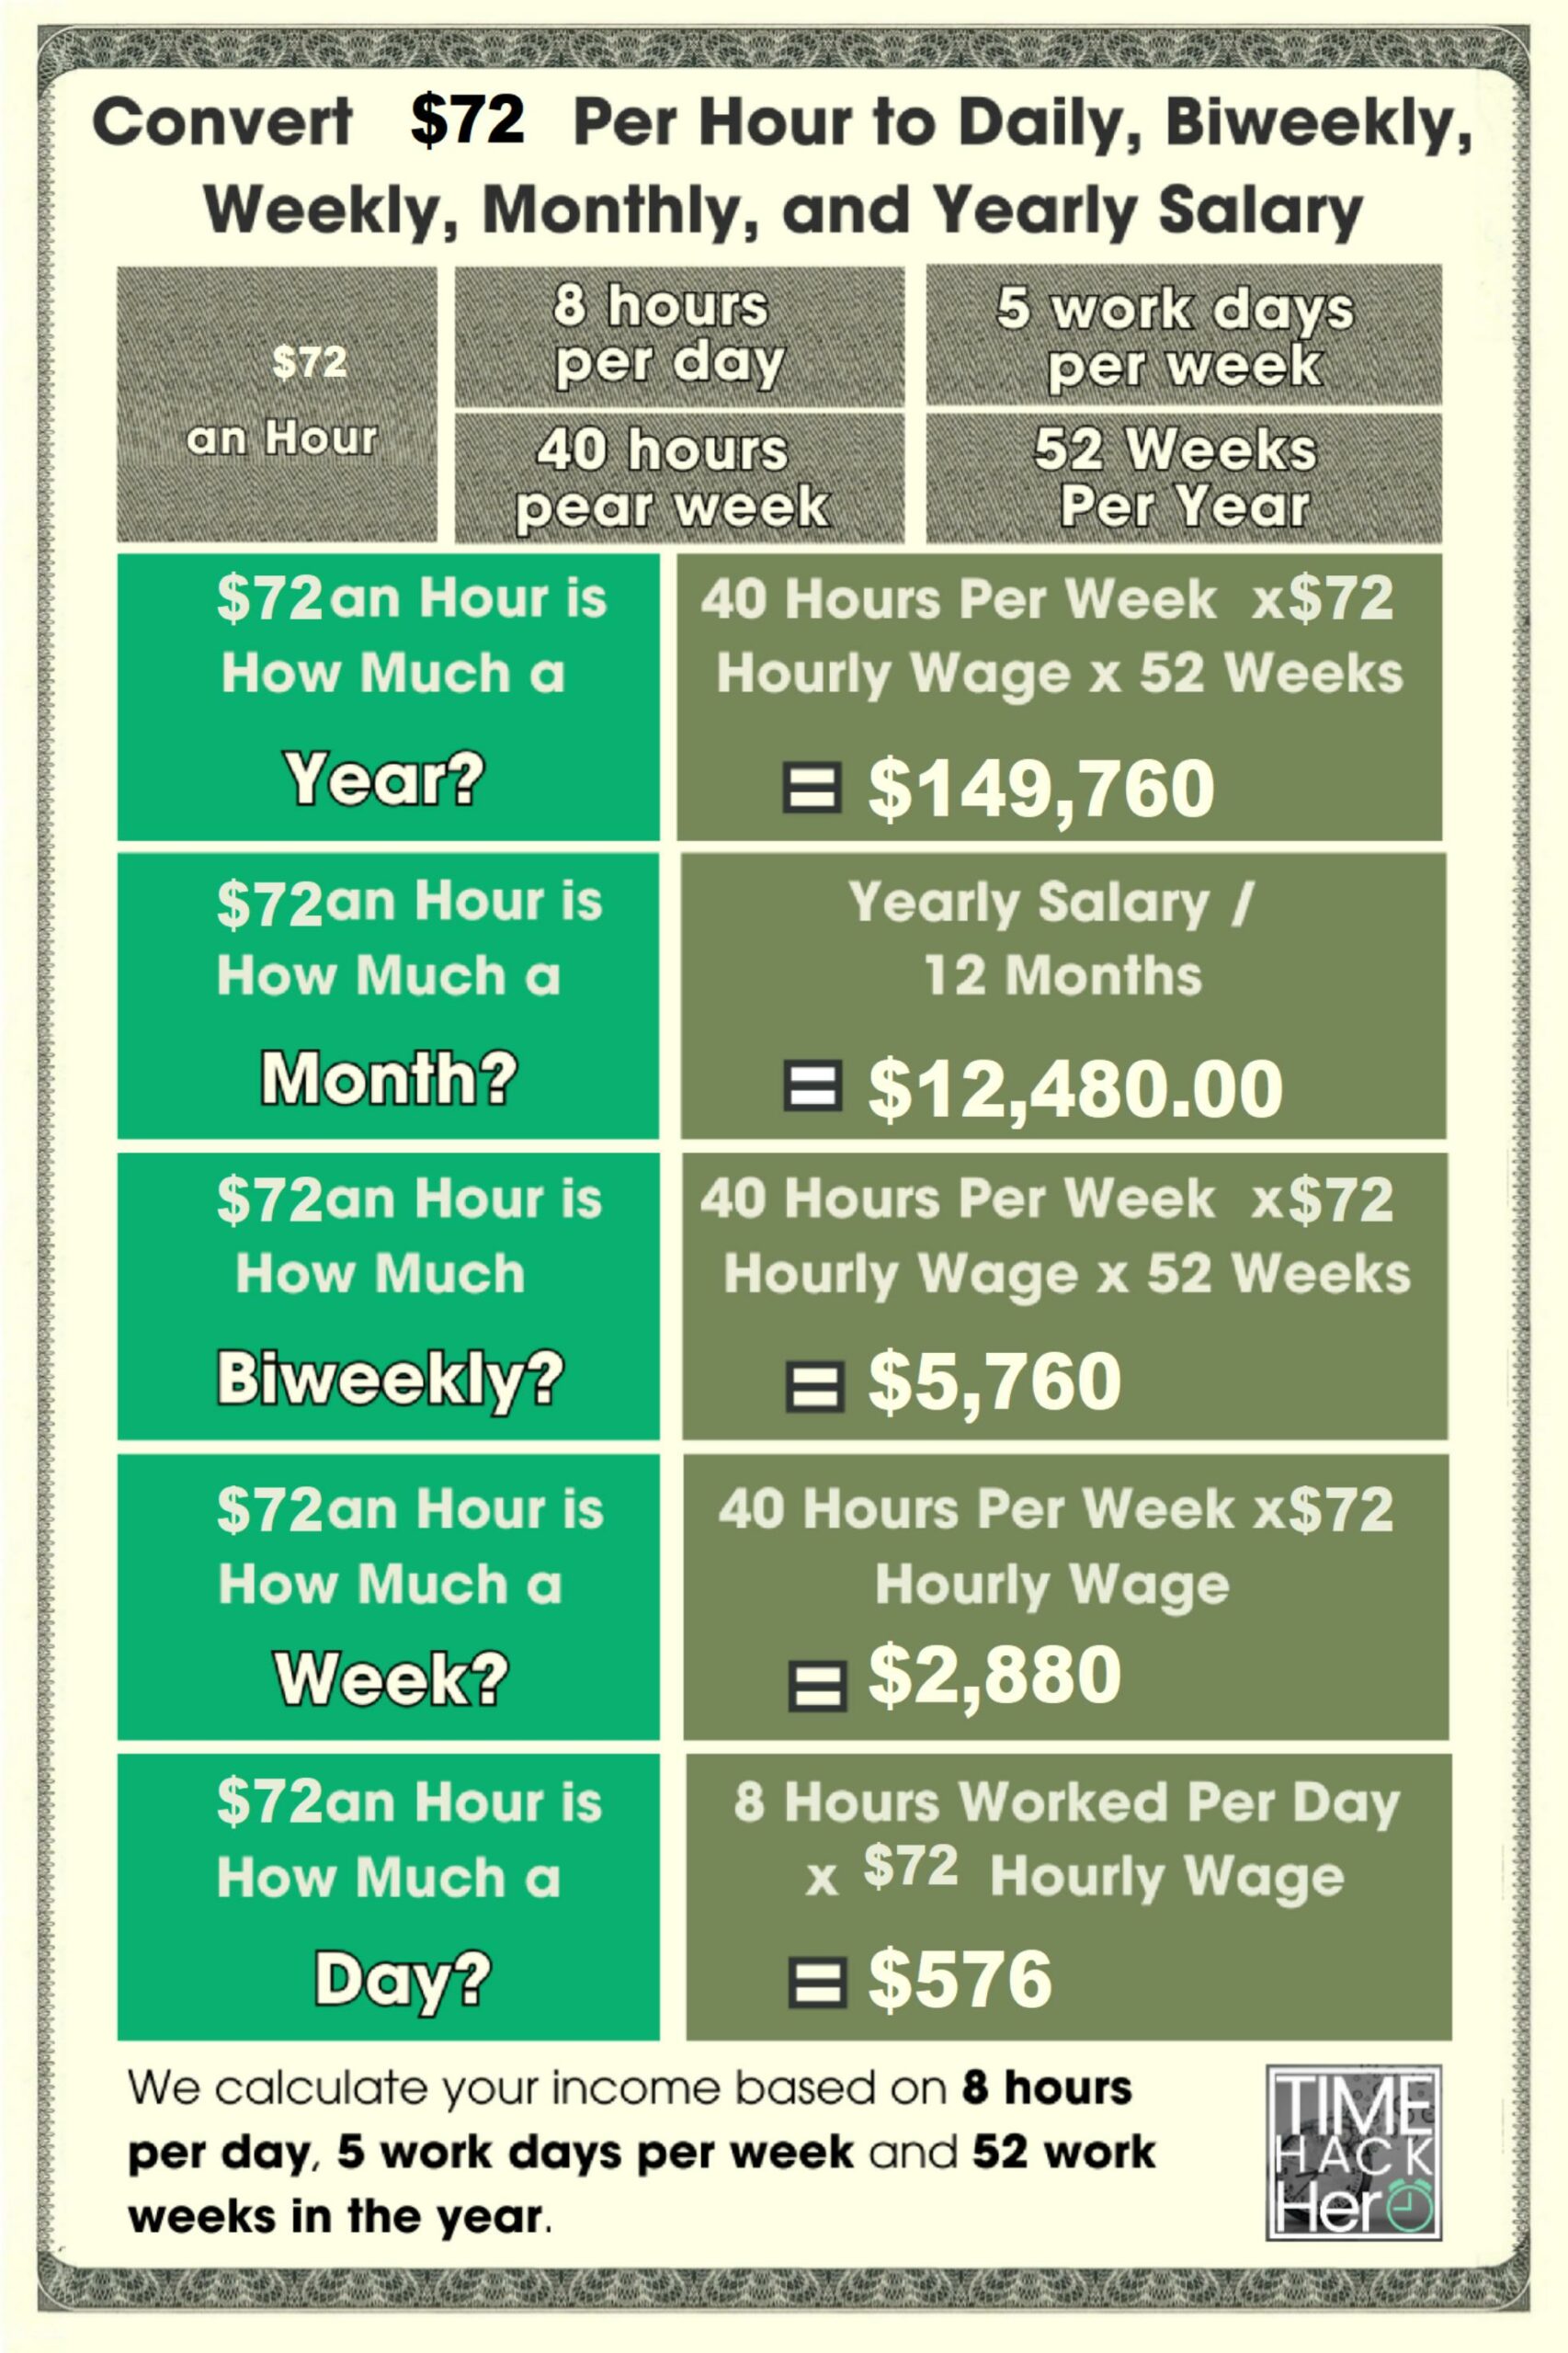 Convert $72 Per Hour to Weekly, Monthly, and Yearly Salary